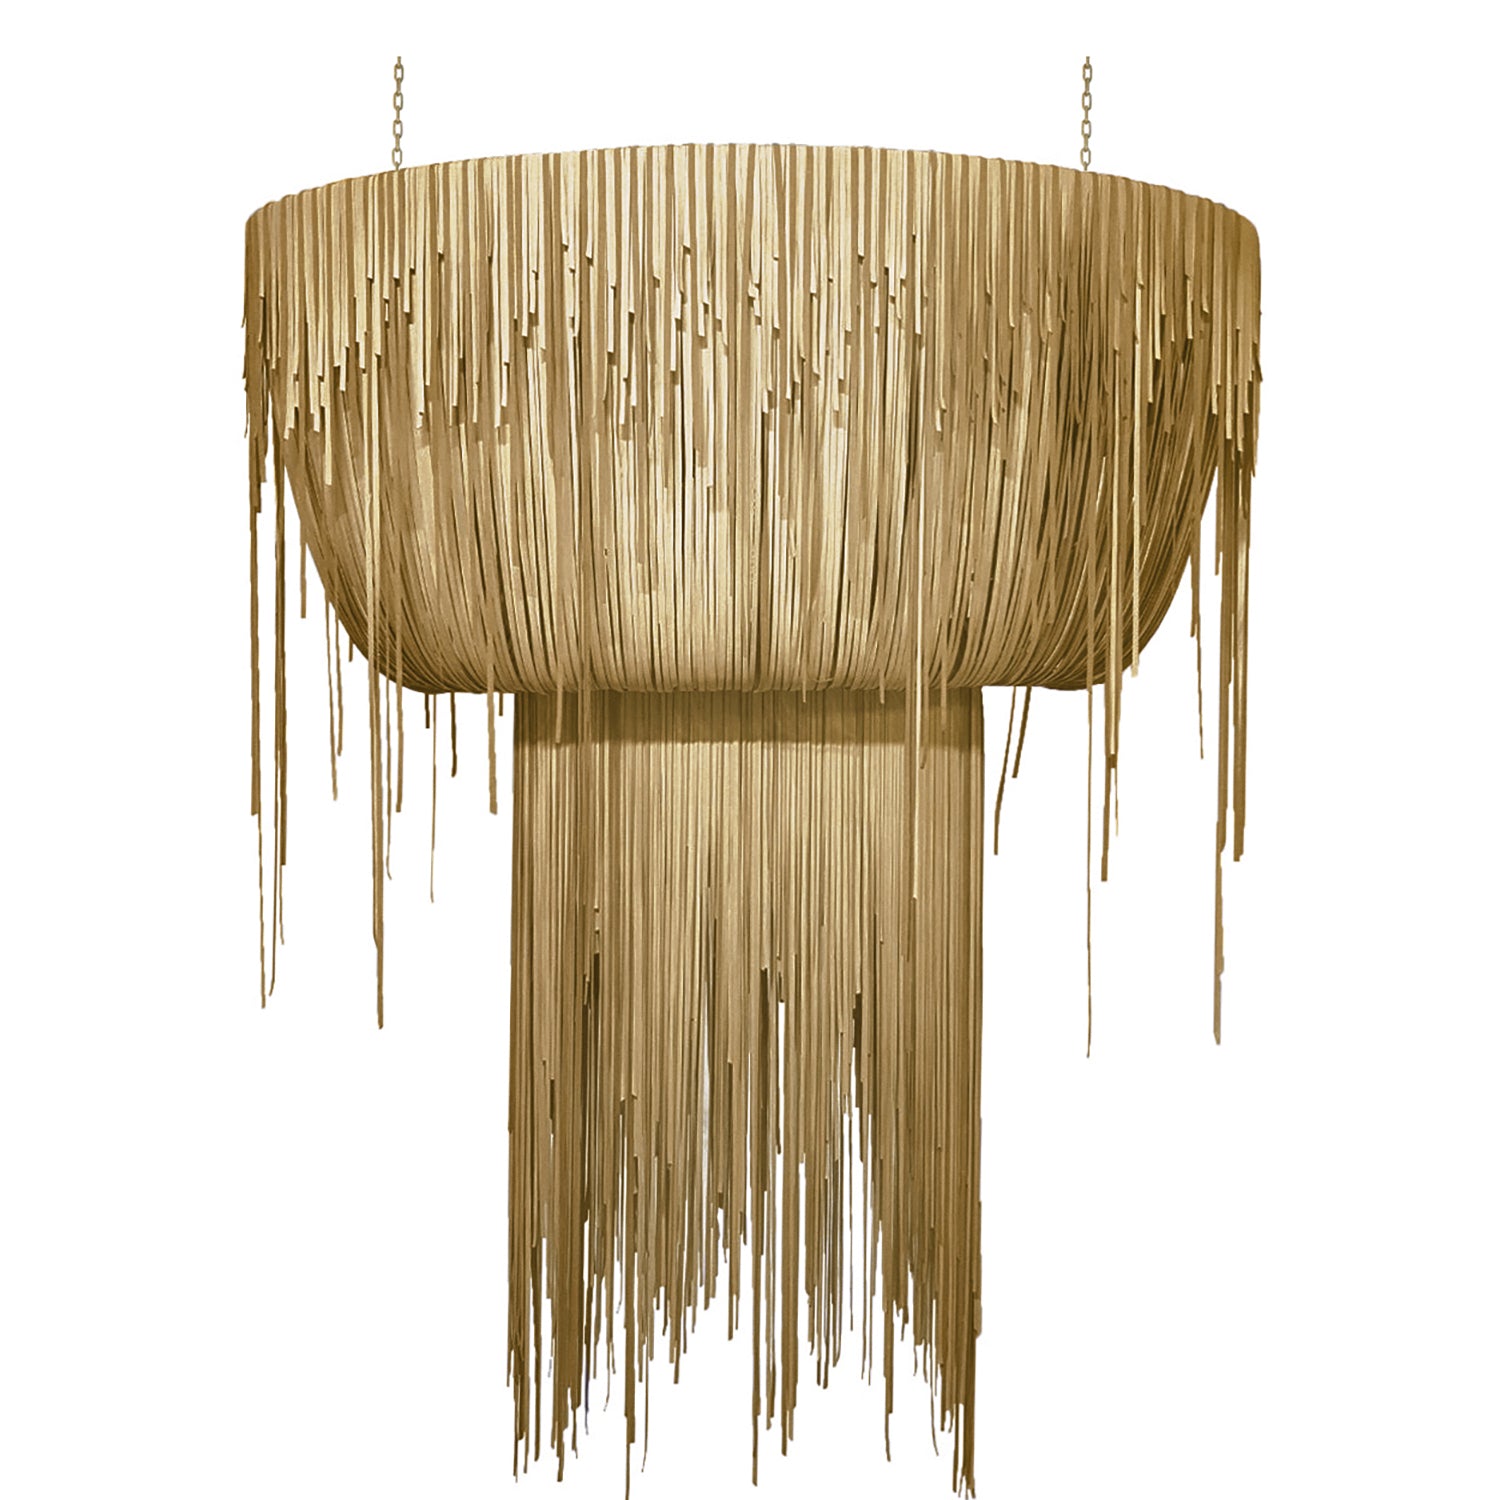 Large Oval Urchin Leather Chandelier in Metallic Leather